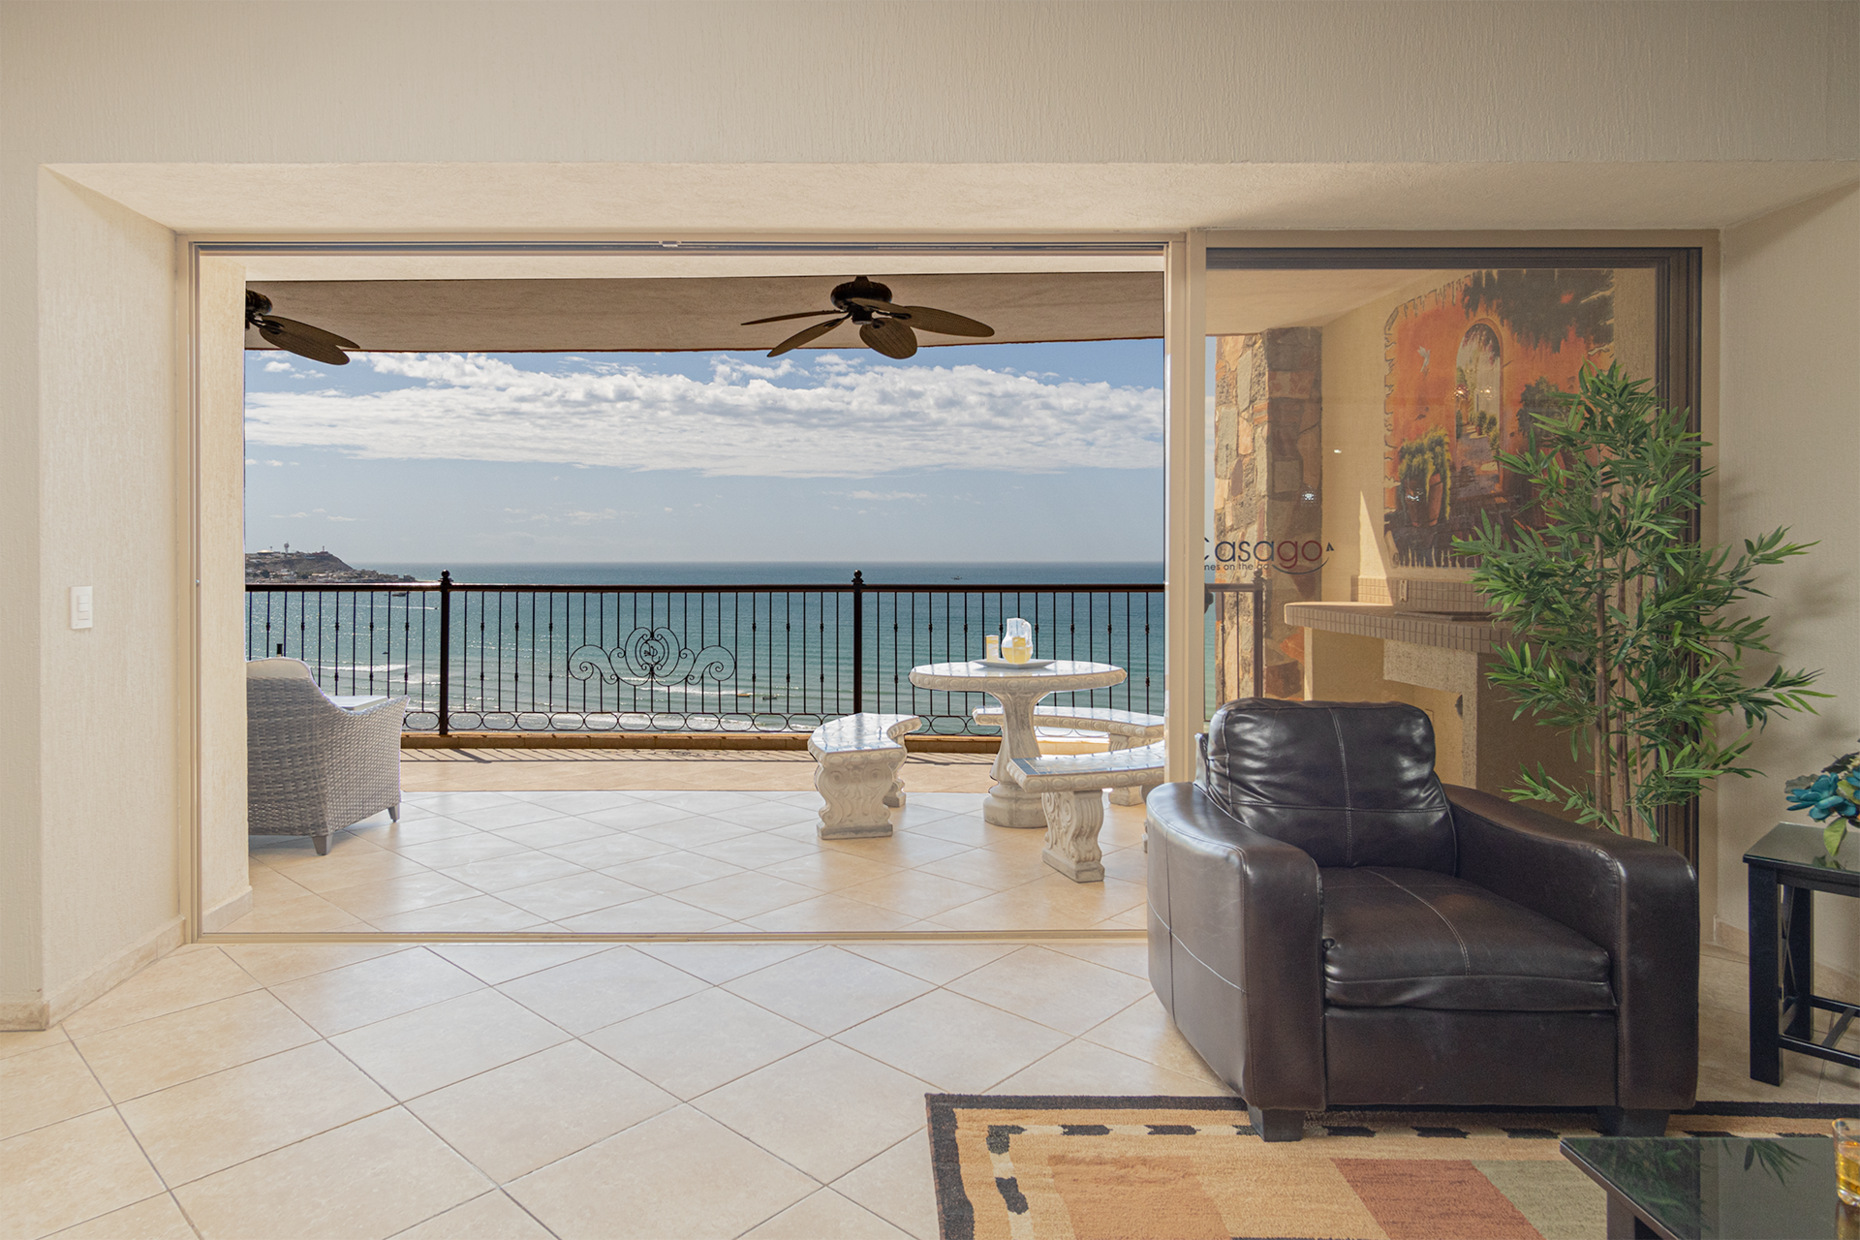 The sliding door to the patio opens to let the beach inside!